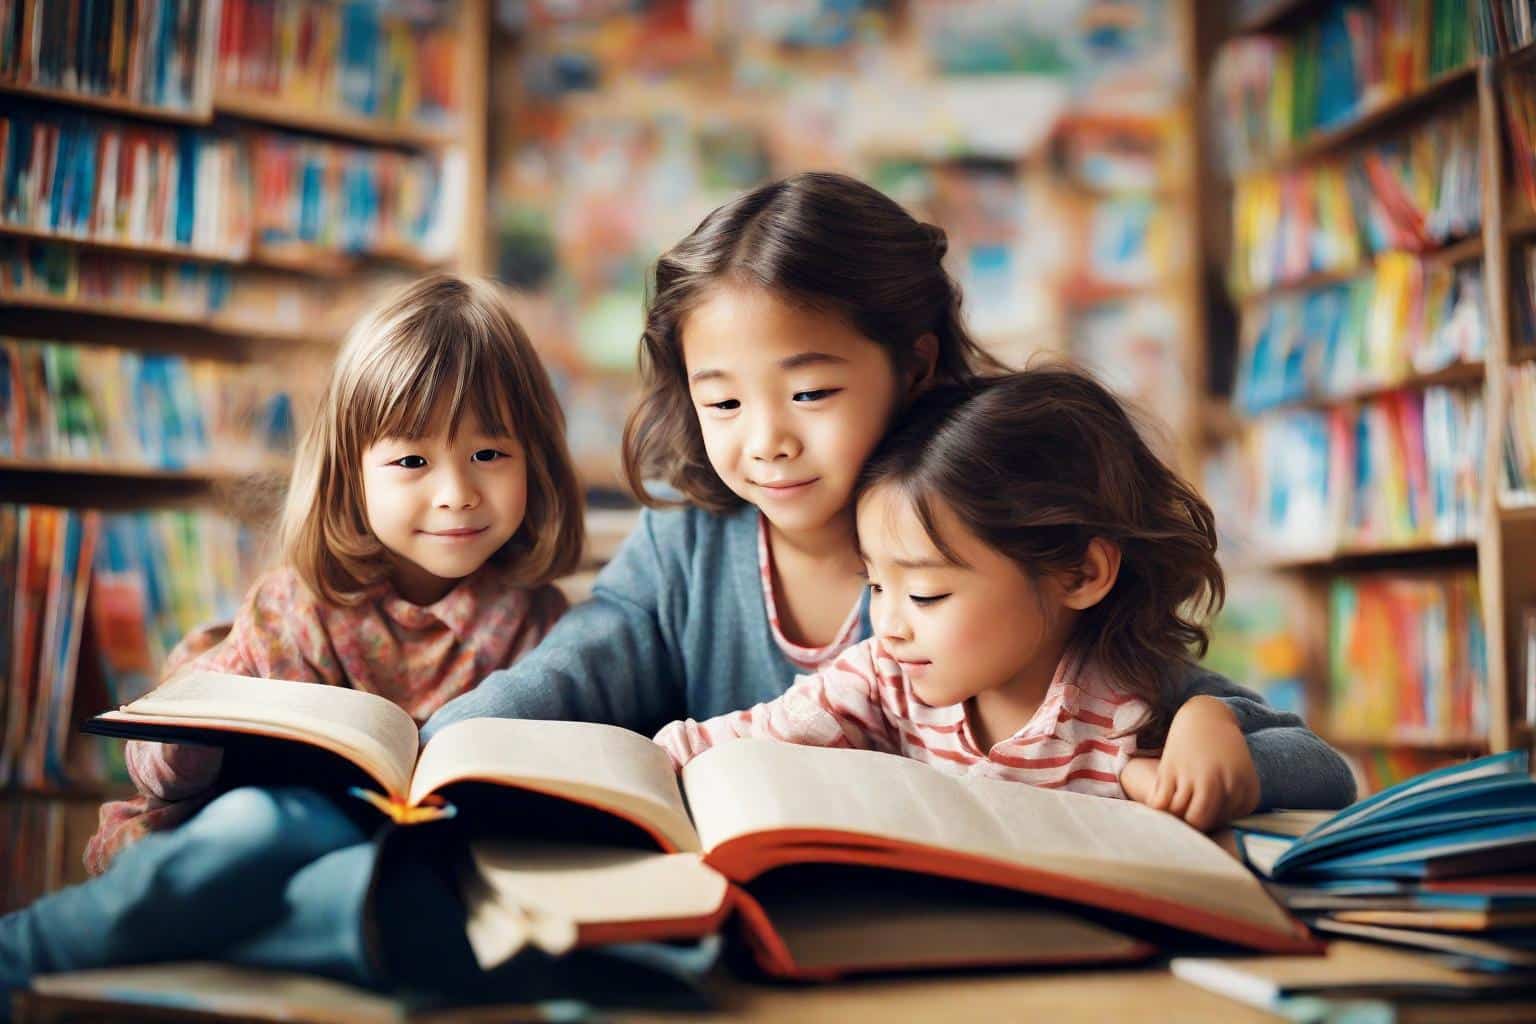 How can I assist my child in becoming a reader?